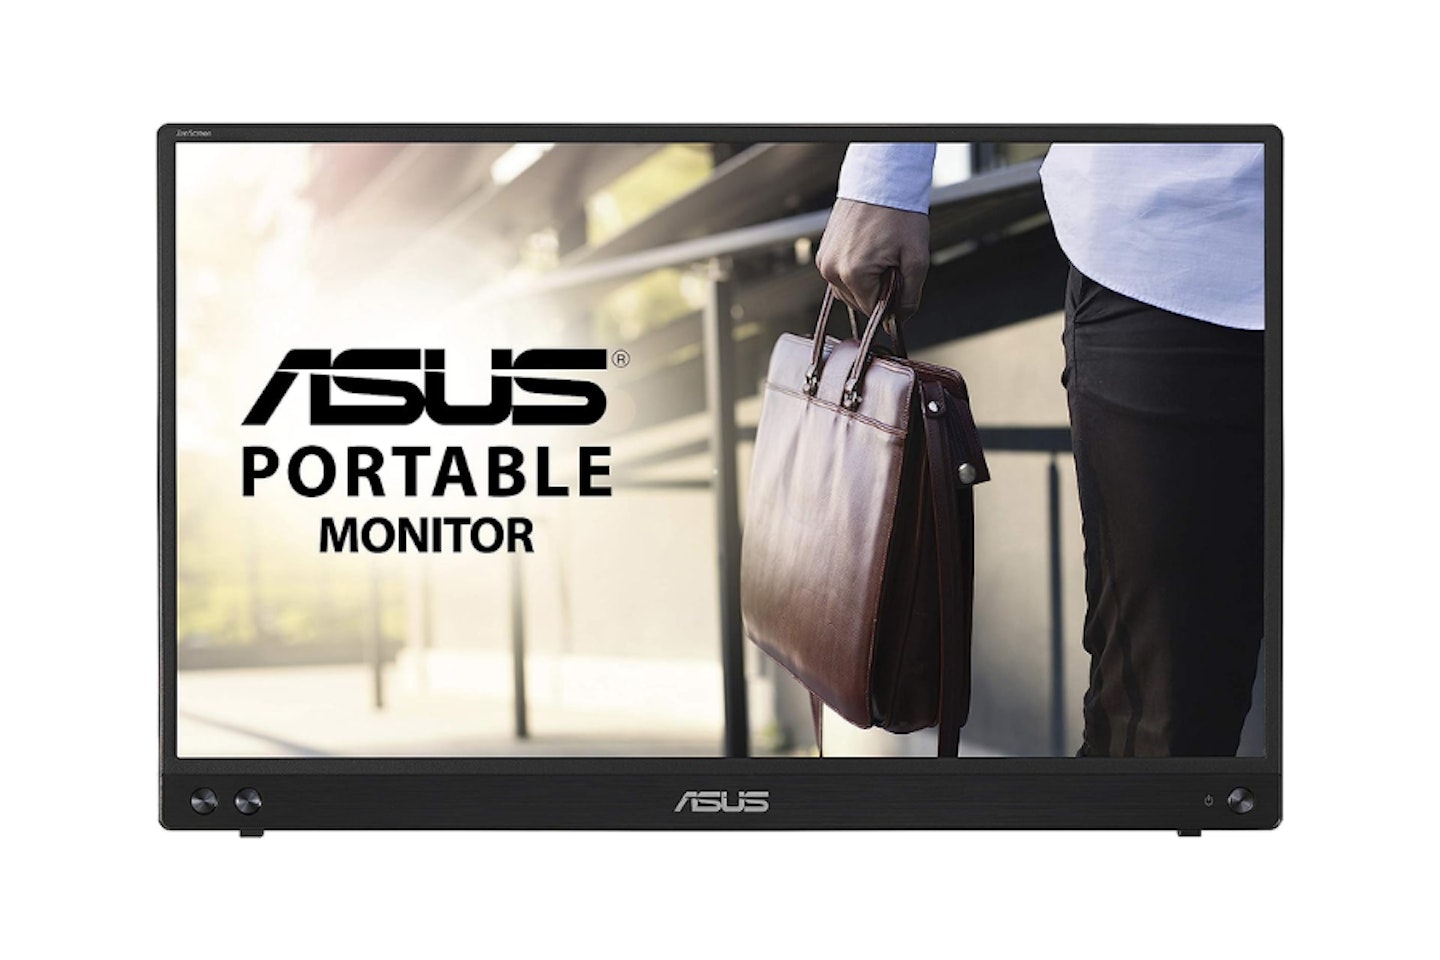 ASUS ZenScreen Portable Monitor 15.6" - one of the best monitors for Mac Mini